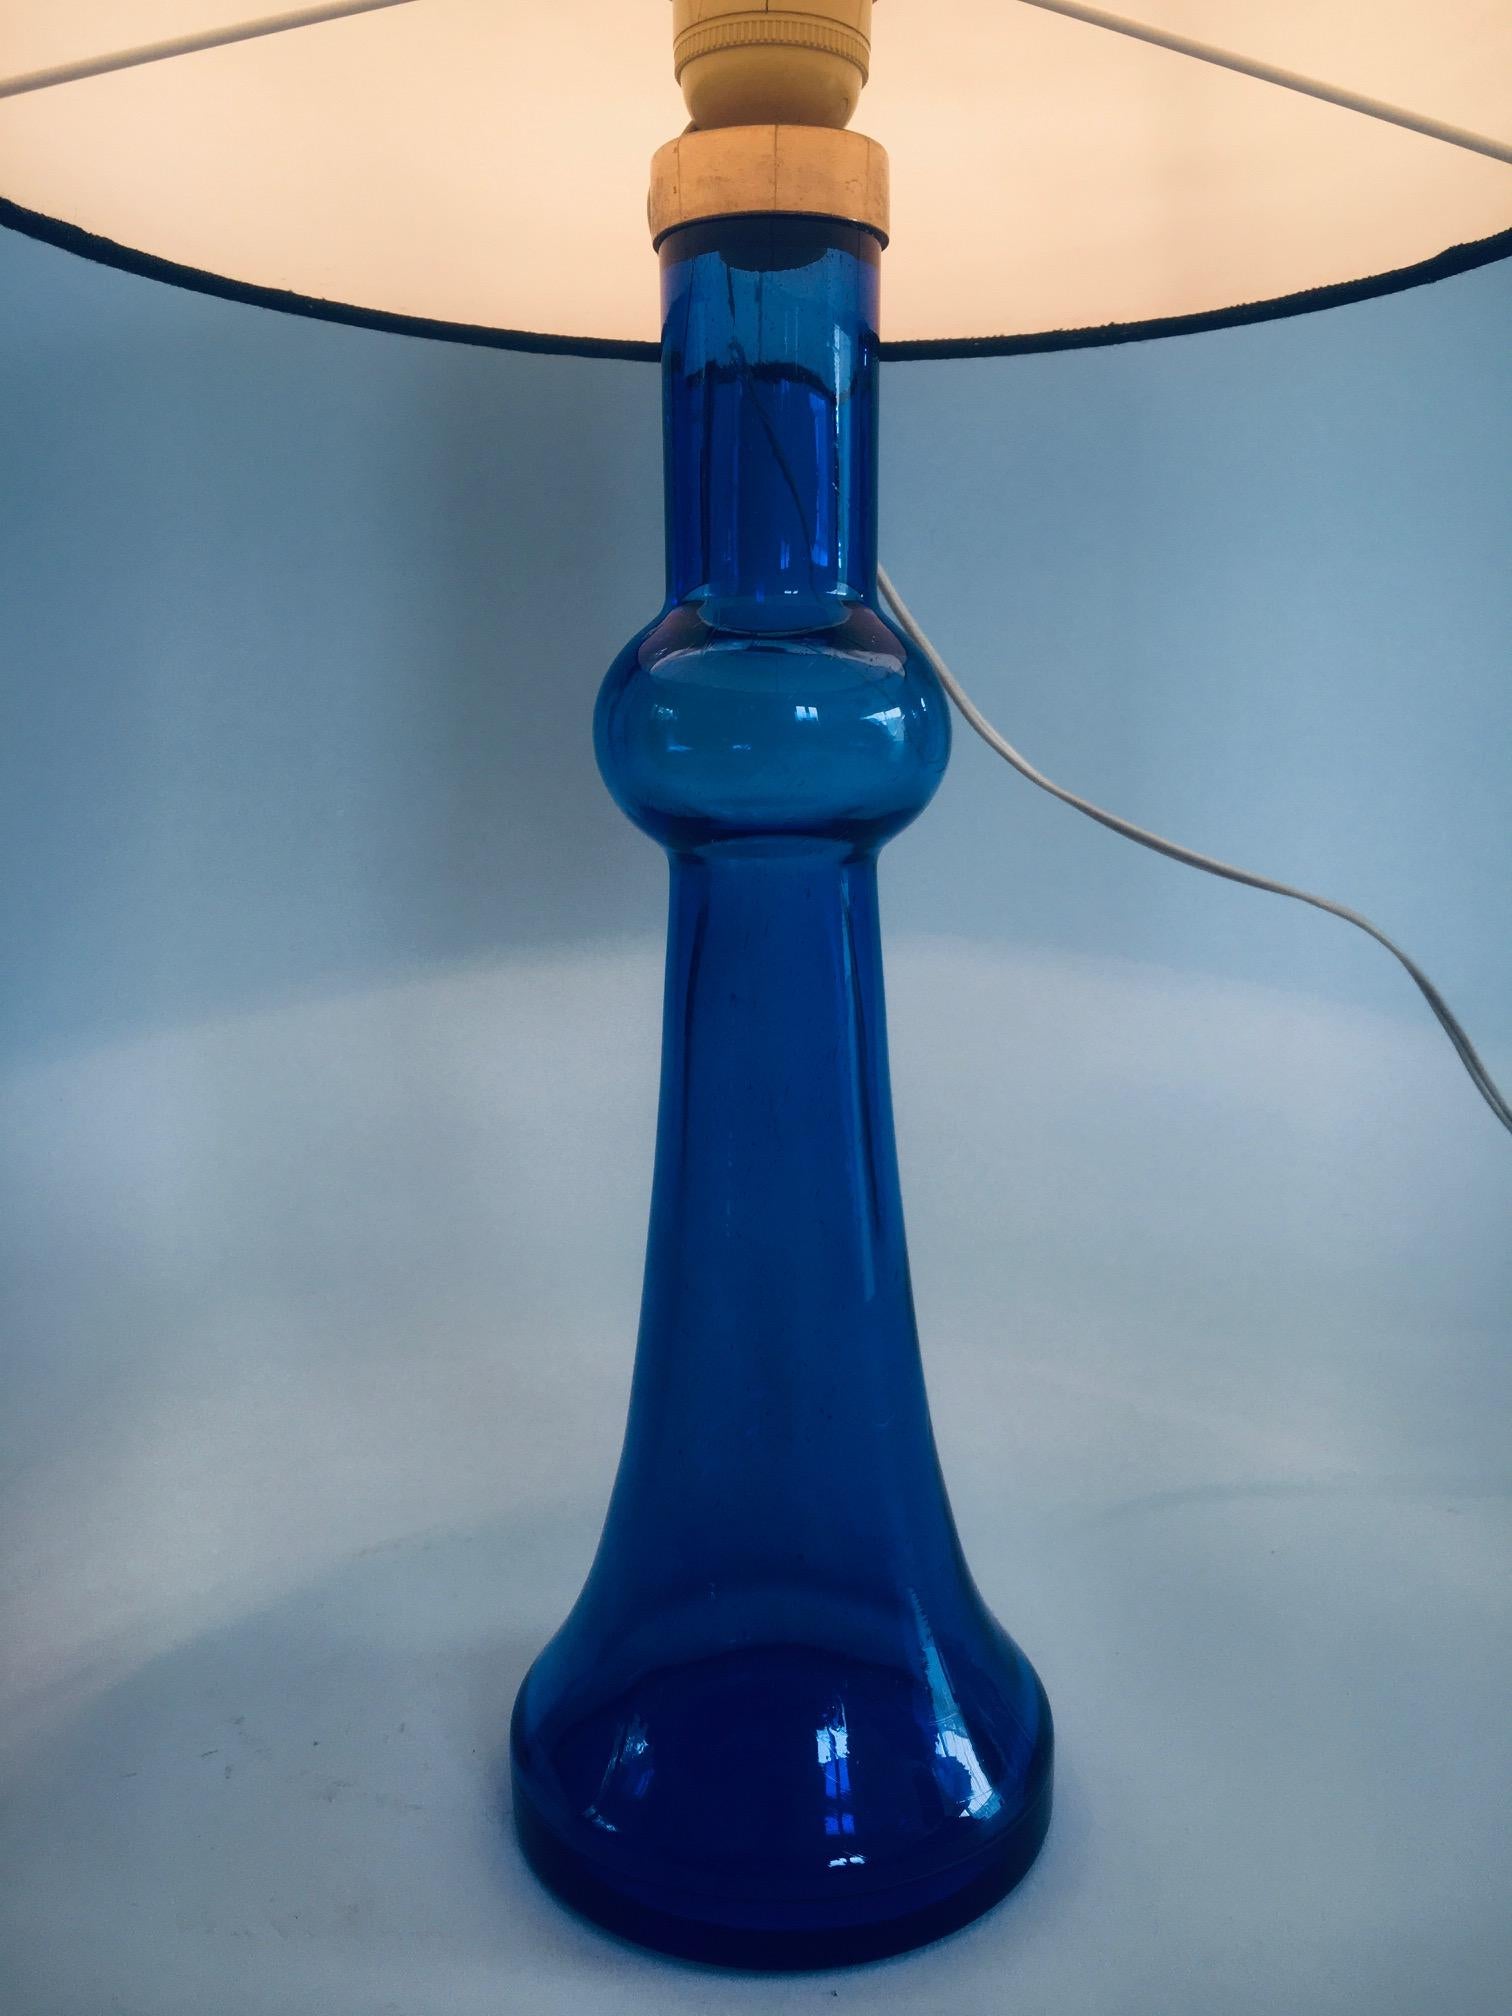 Midcentury Design Blue Glass Table Lamp by Nanny Still for Raak, 1960's For Sale 7